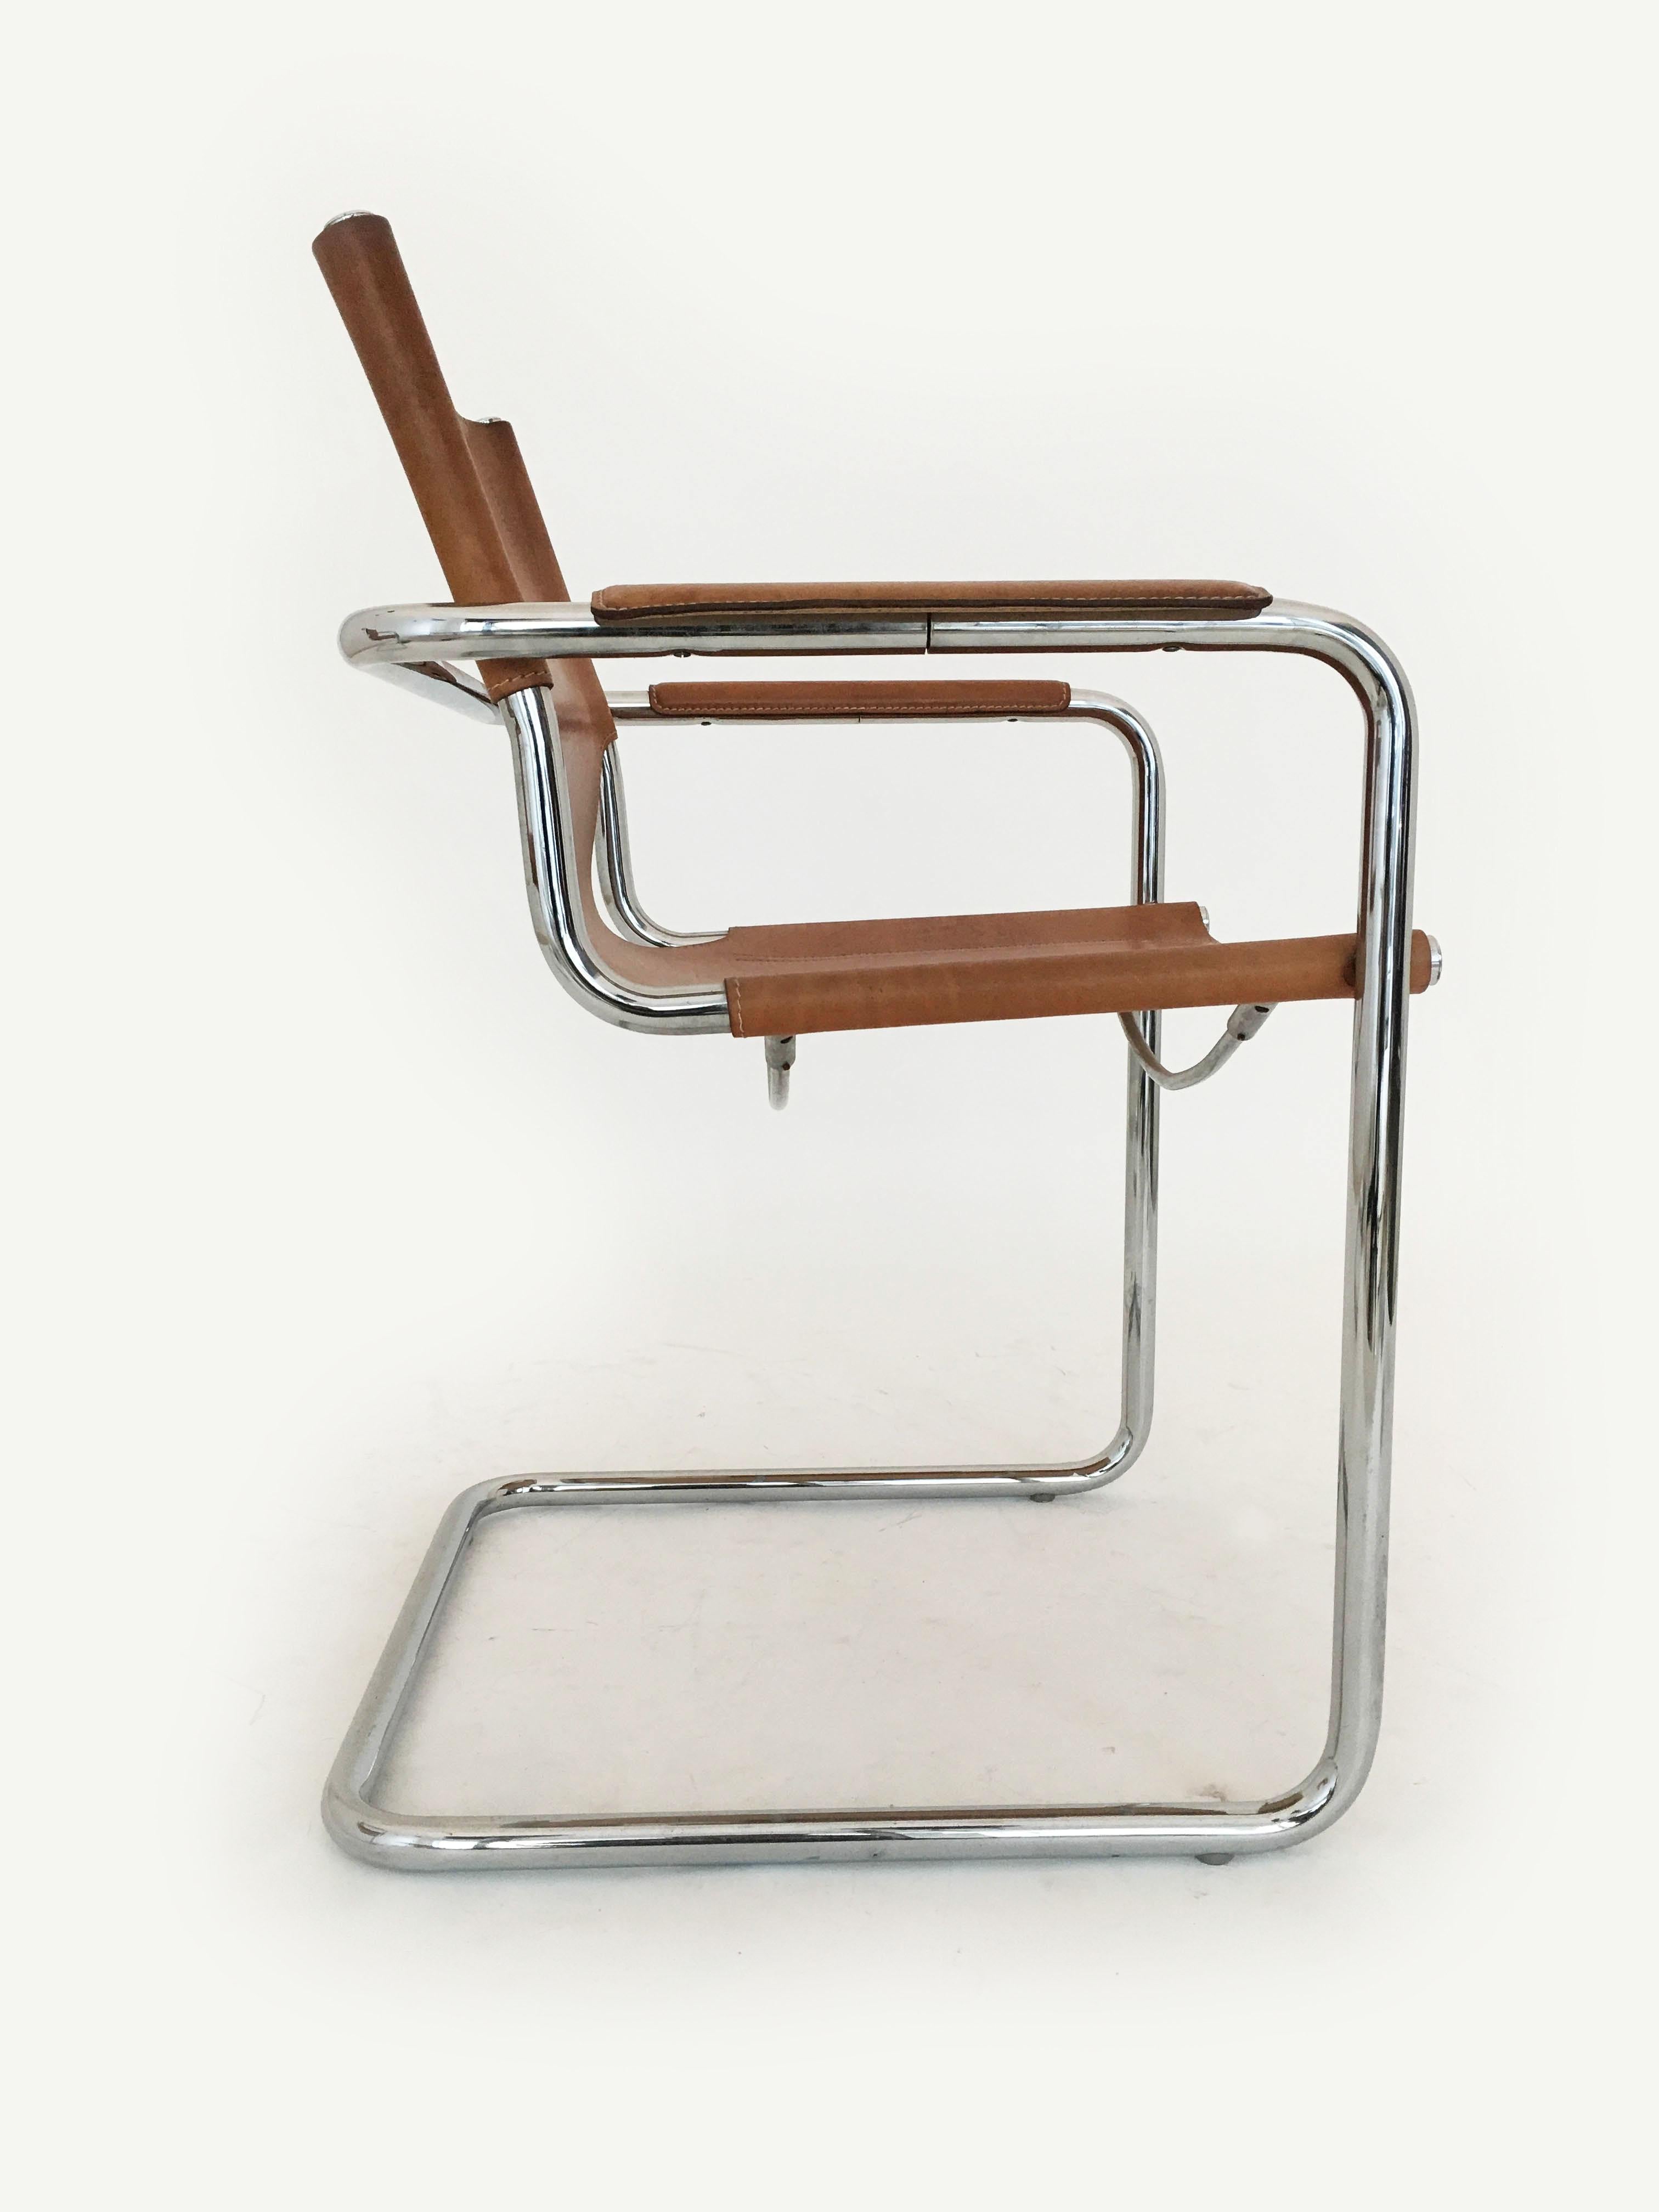 Matteo Grassi Cantilever Visitor Side Chairs Pair, Italy, 1970s (20. Jahrhundert) im Angebot